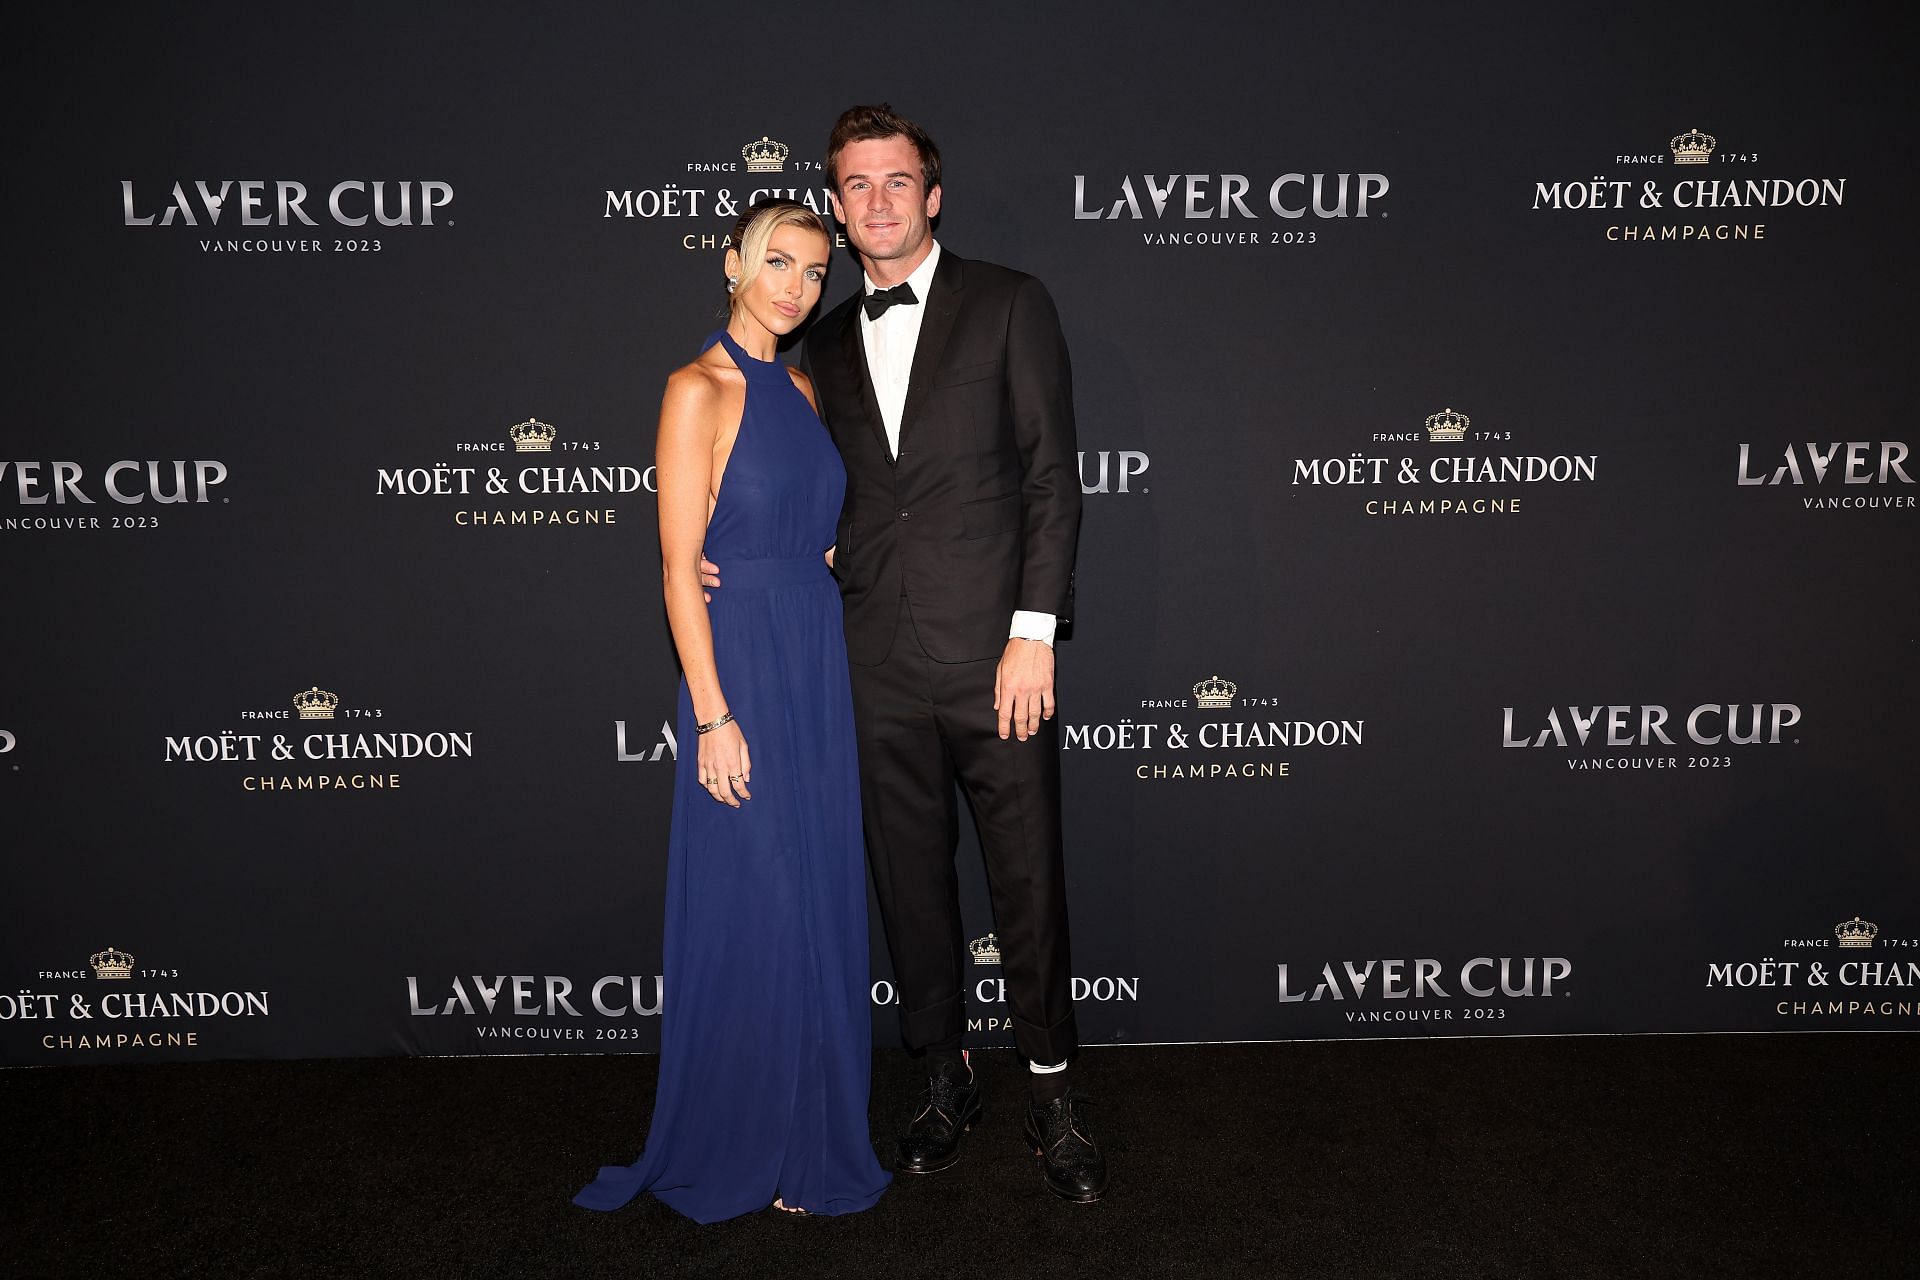 Laver Cup 2023 - Preview Day 4